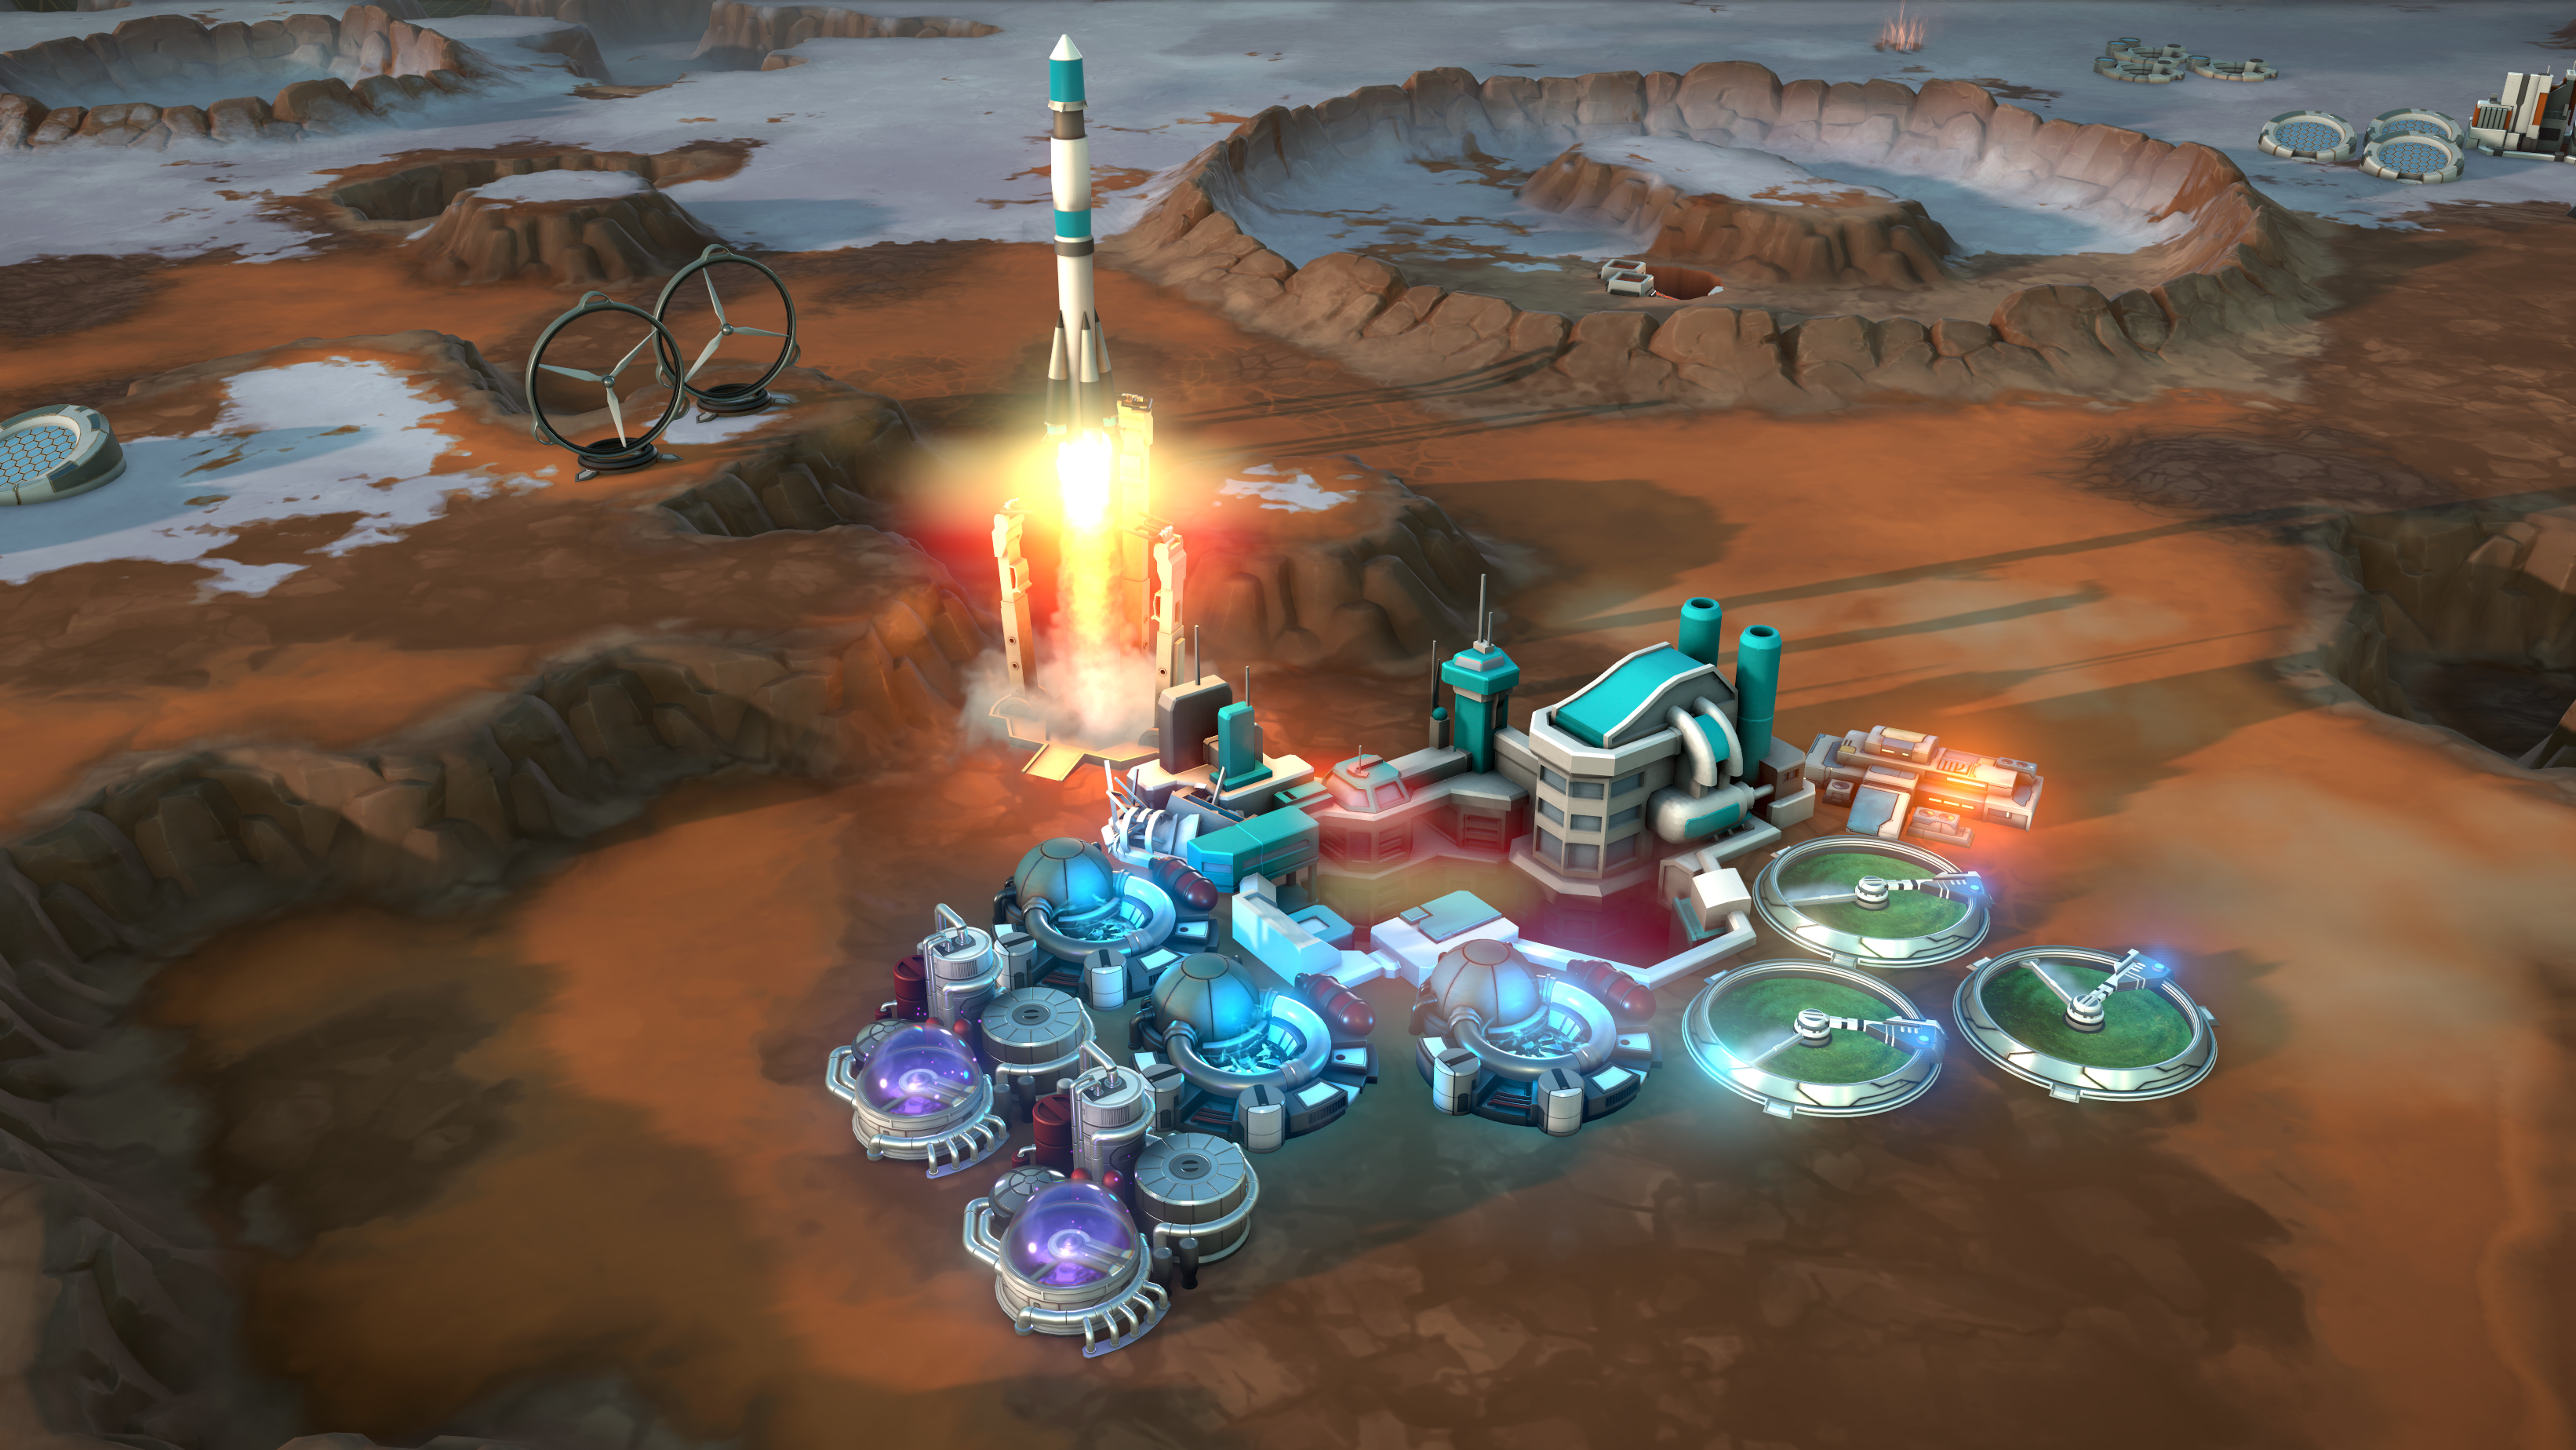  offworld trading company released for Mac